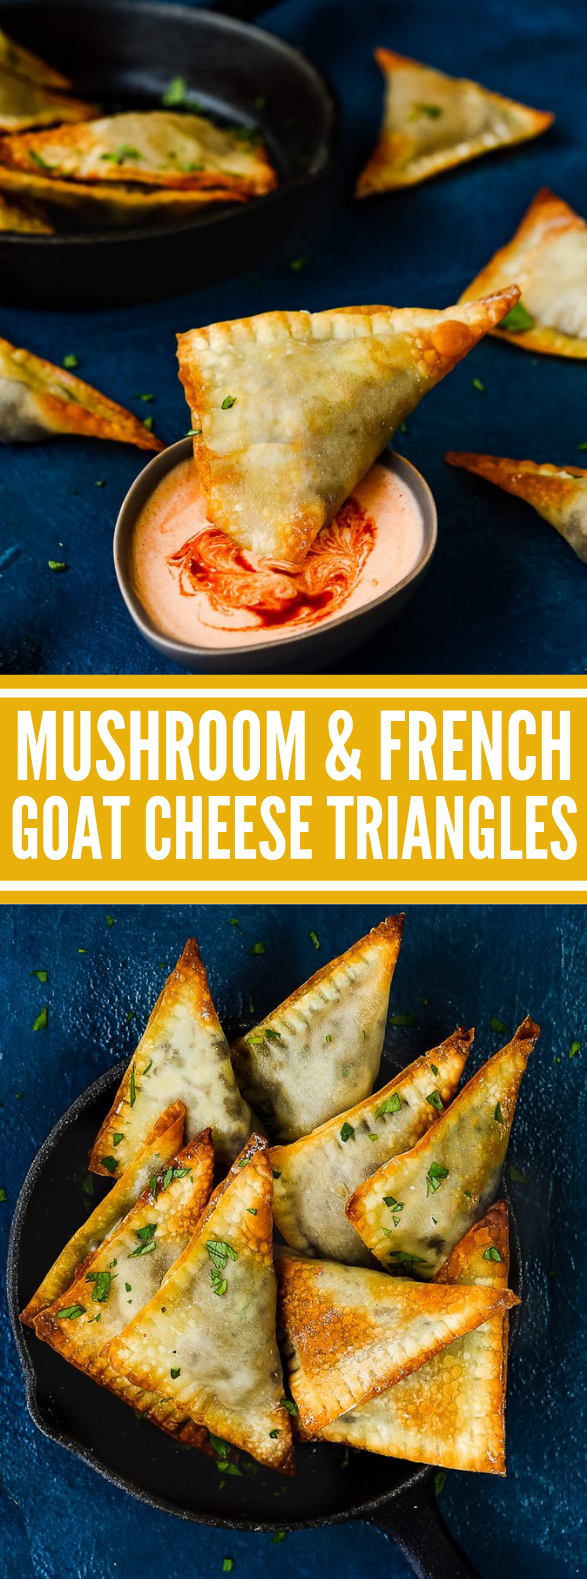 Mushroom and French Goat Cheese Triangles #vegetable #vegetarian